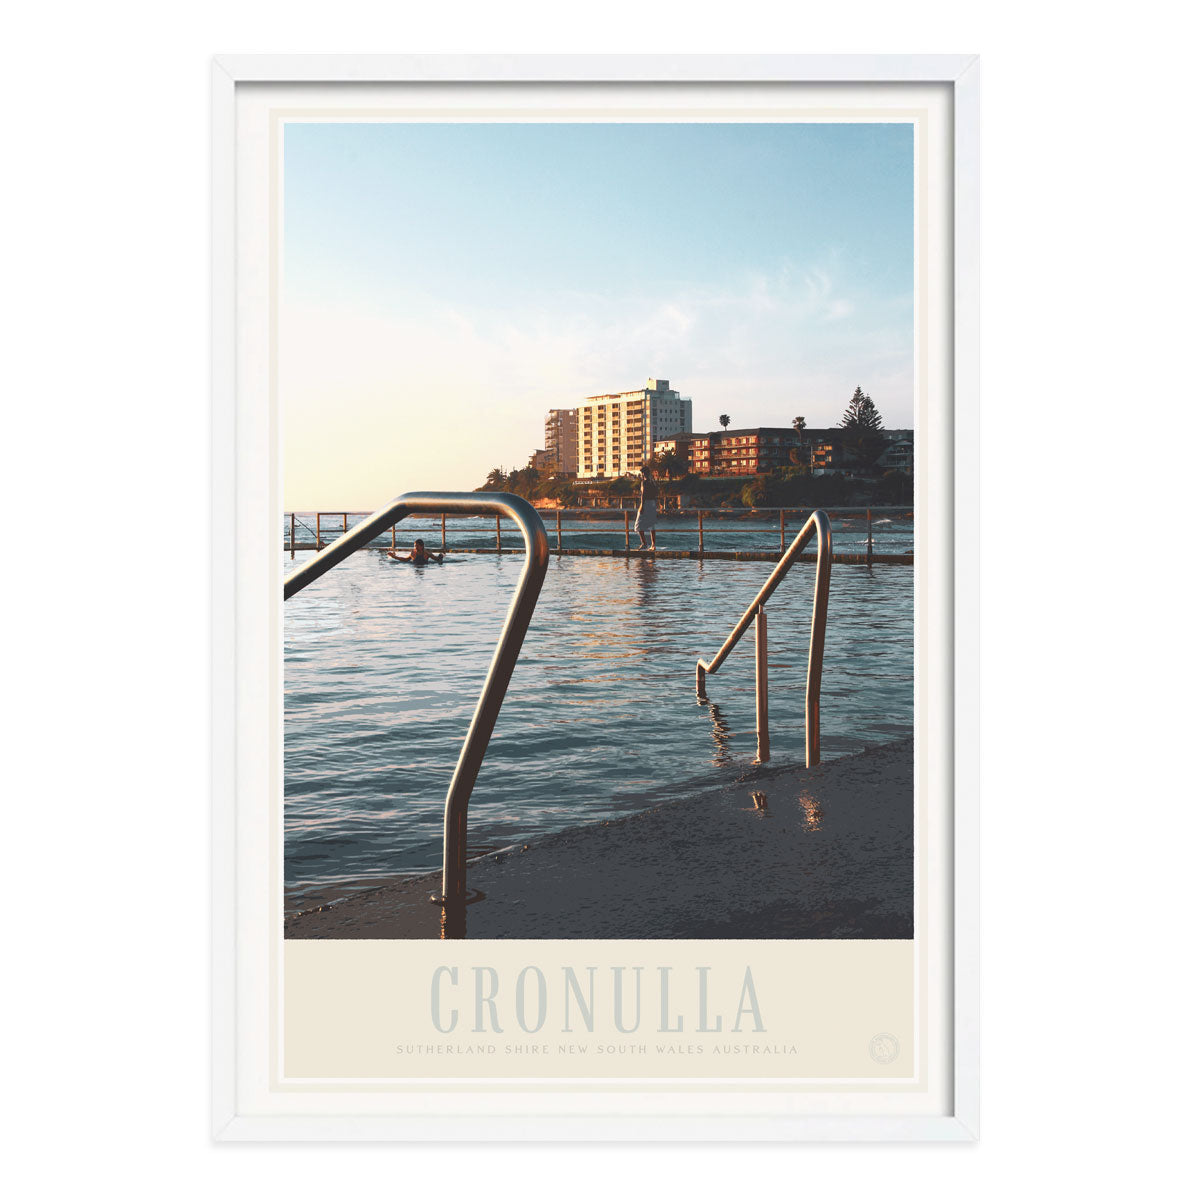 Cronulla Beach Pool vintage retro travel poster print in white frame by Places We Luv